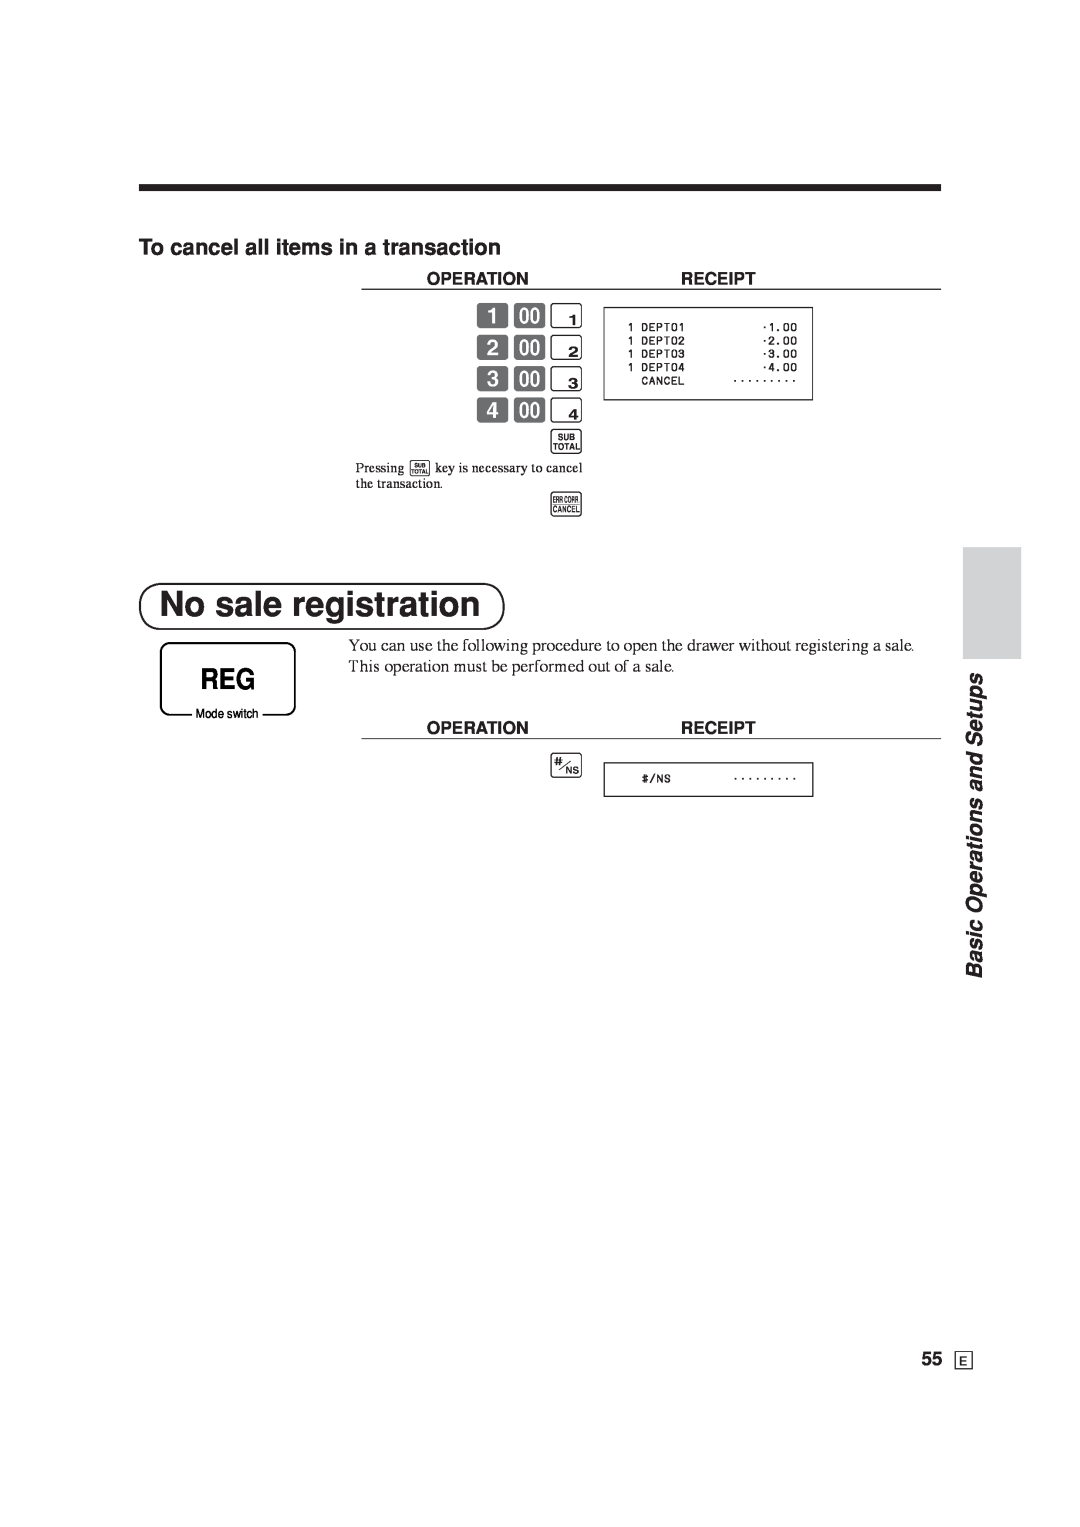 Casio SE-C6000 No sale registration, To cancel all items in a transaction, 4-$ s, Basic Operations and Setups, Mode switch 